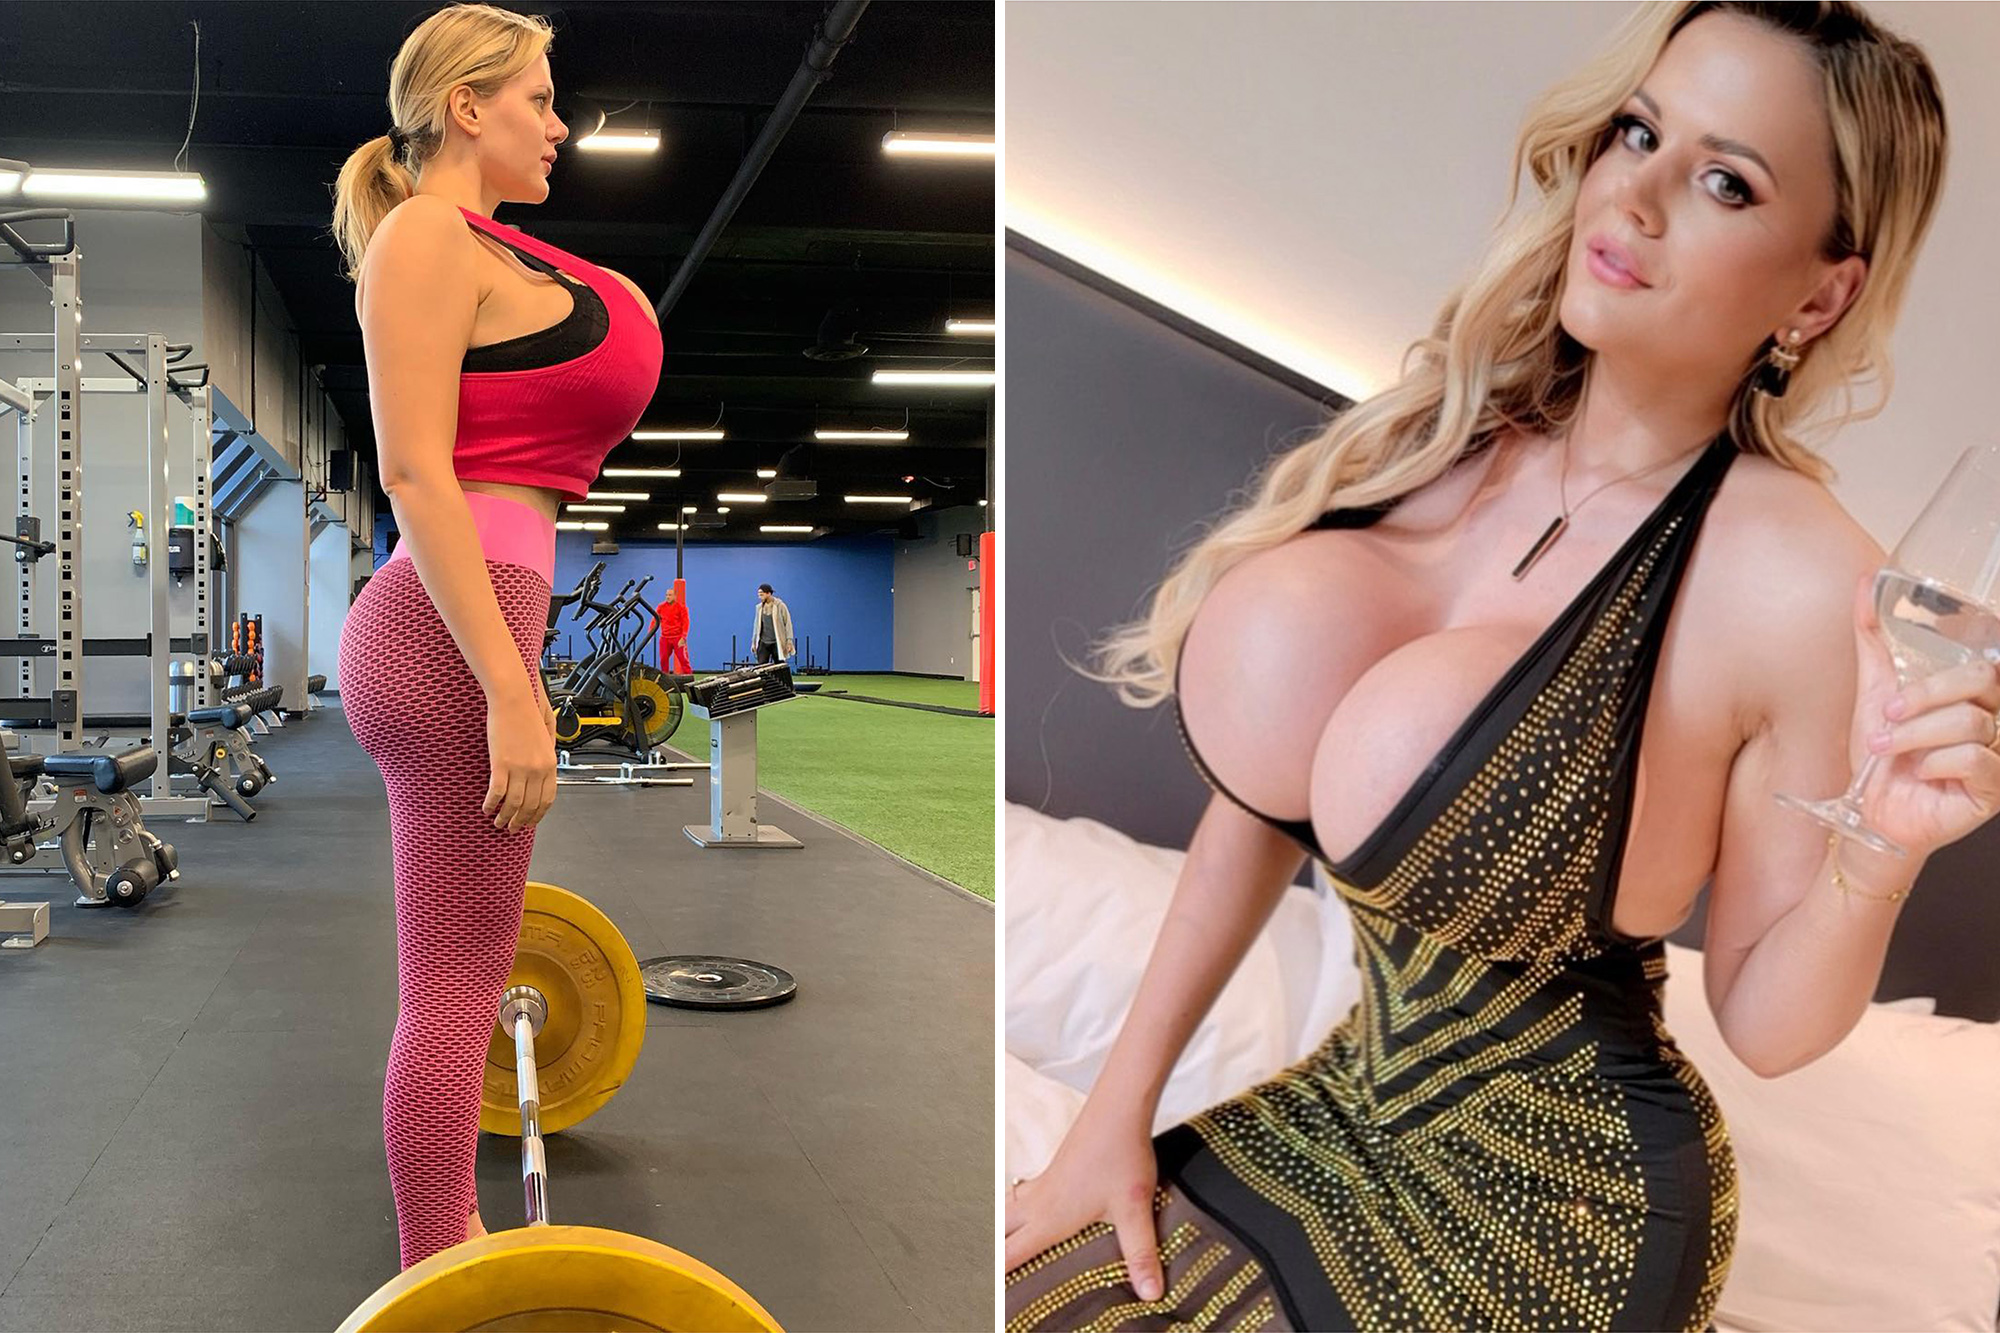 beverly senin recommends large breasted russian women pic